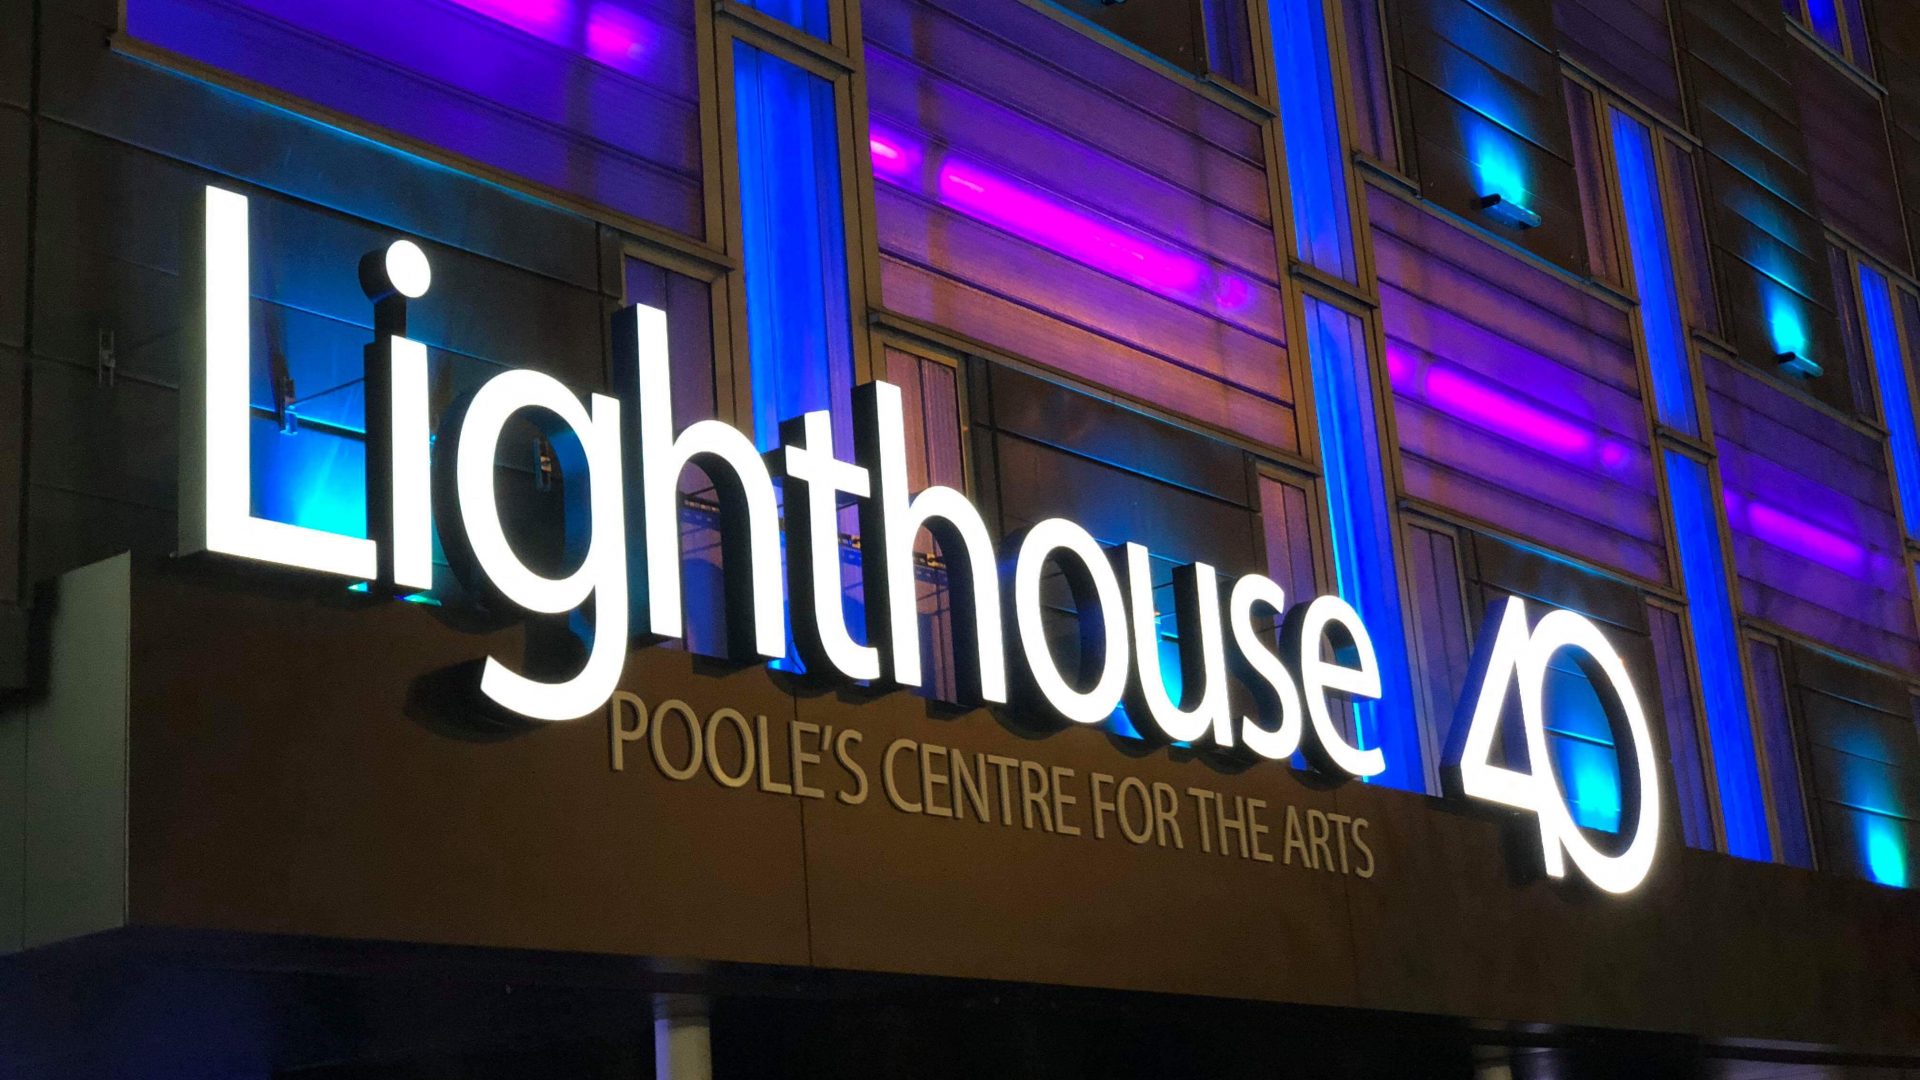 Photo of front of Lighthouse Poole where the BSO gives Poole concerts